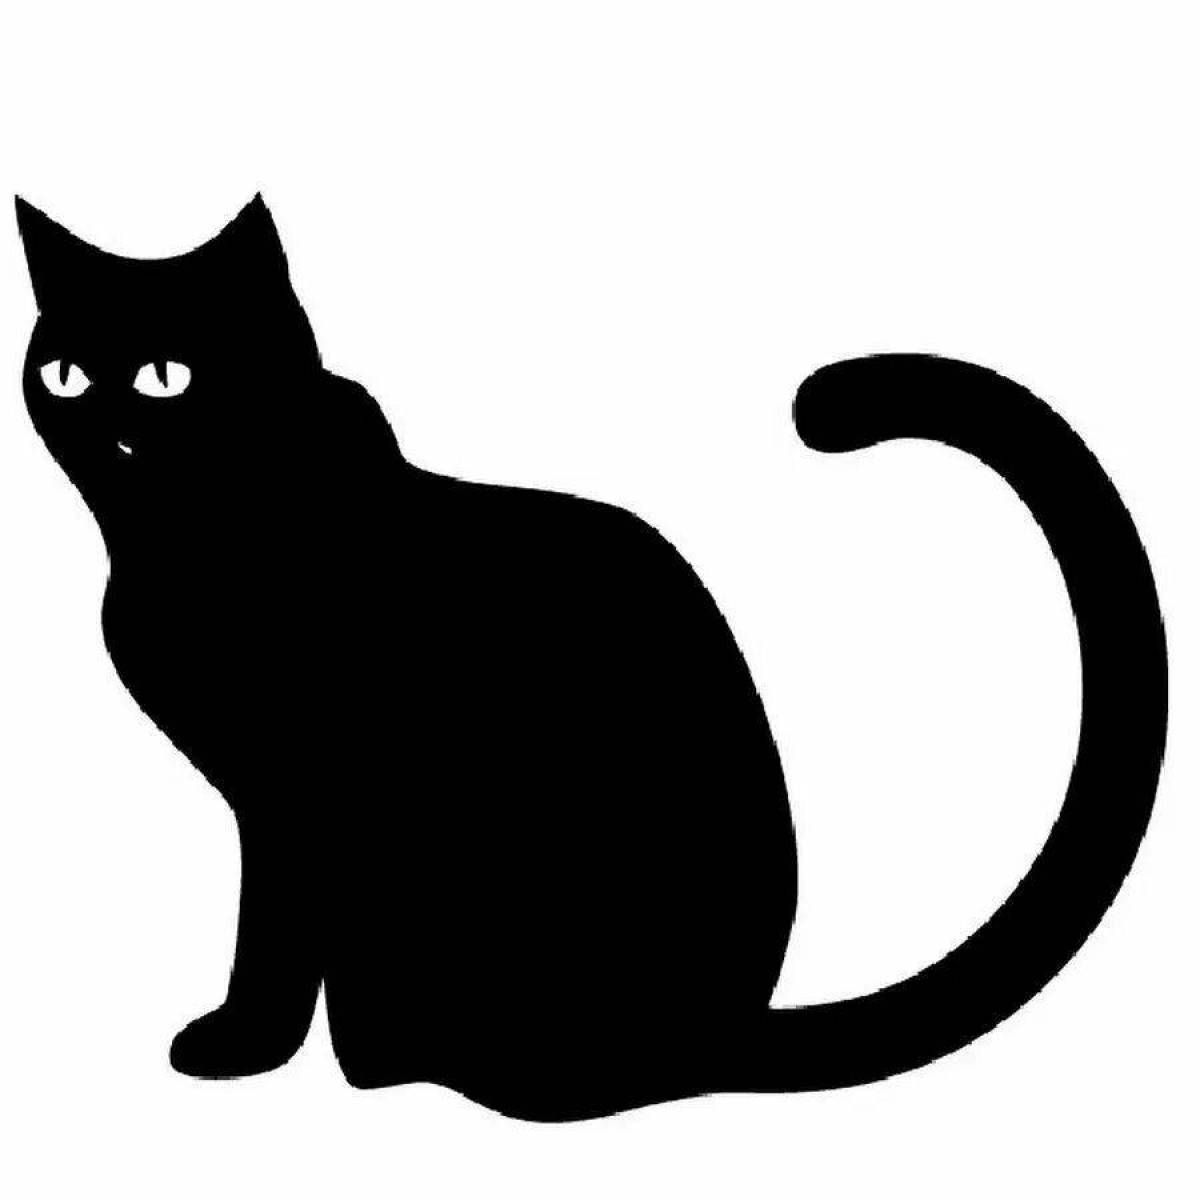 Crazy cat silhouette coloring page